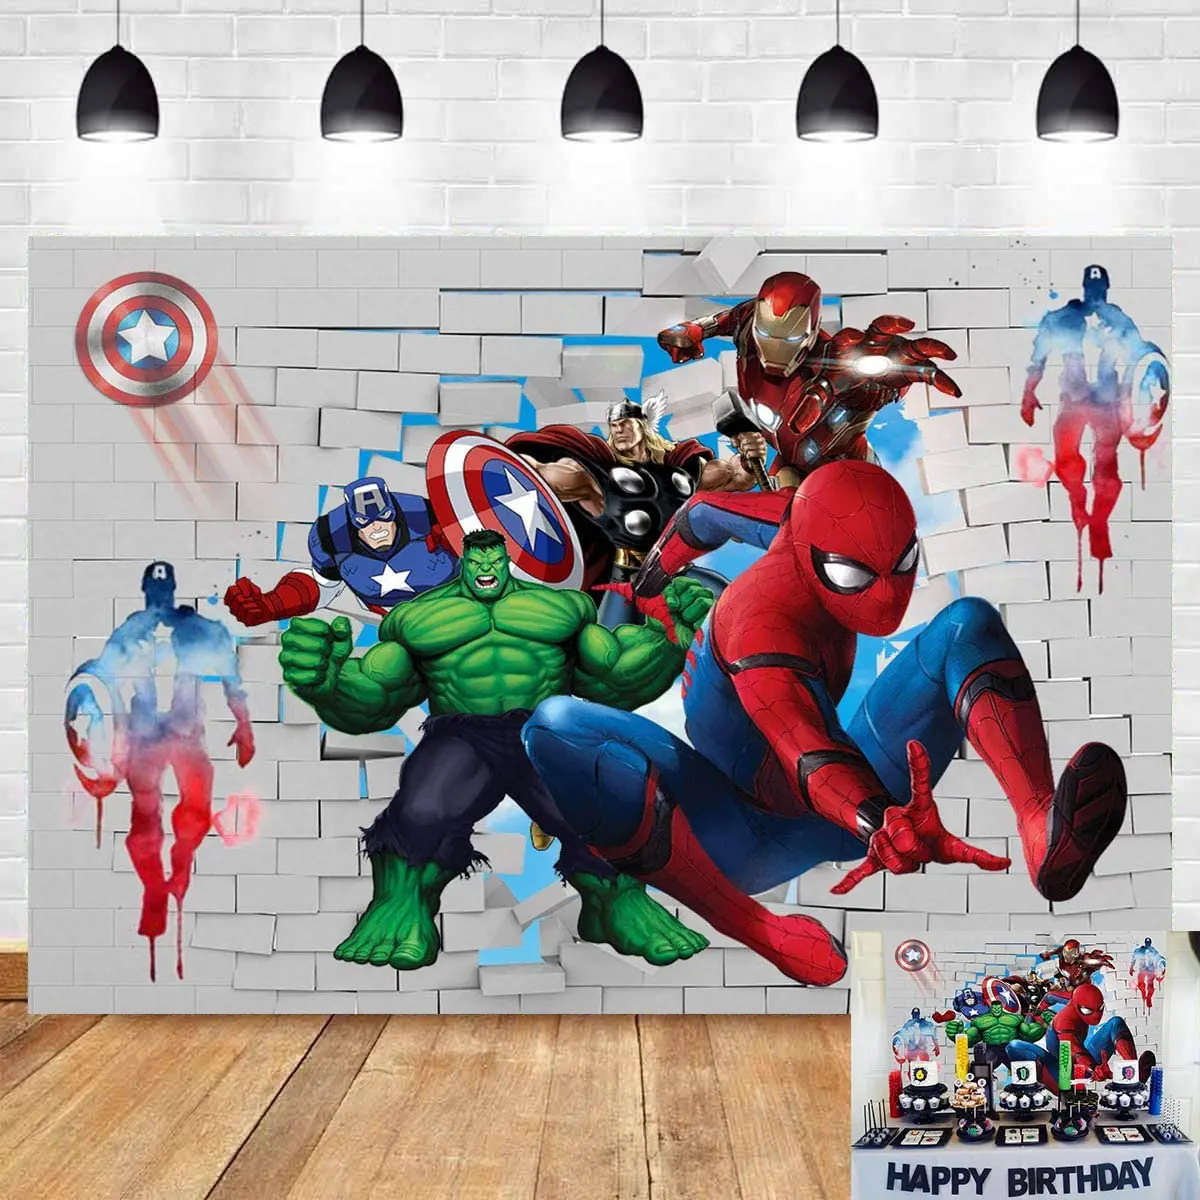 Cartoon The Avengers Superhero Spiderman Photography Background For Boys  Birthday Party Studio Booth Props Backdrop Supplies - Party Backdrops -  AliExpress